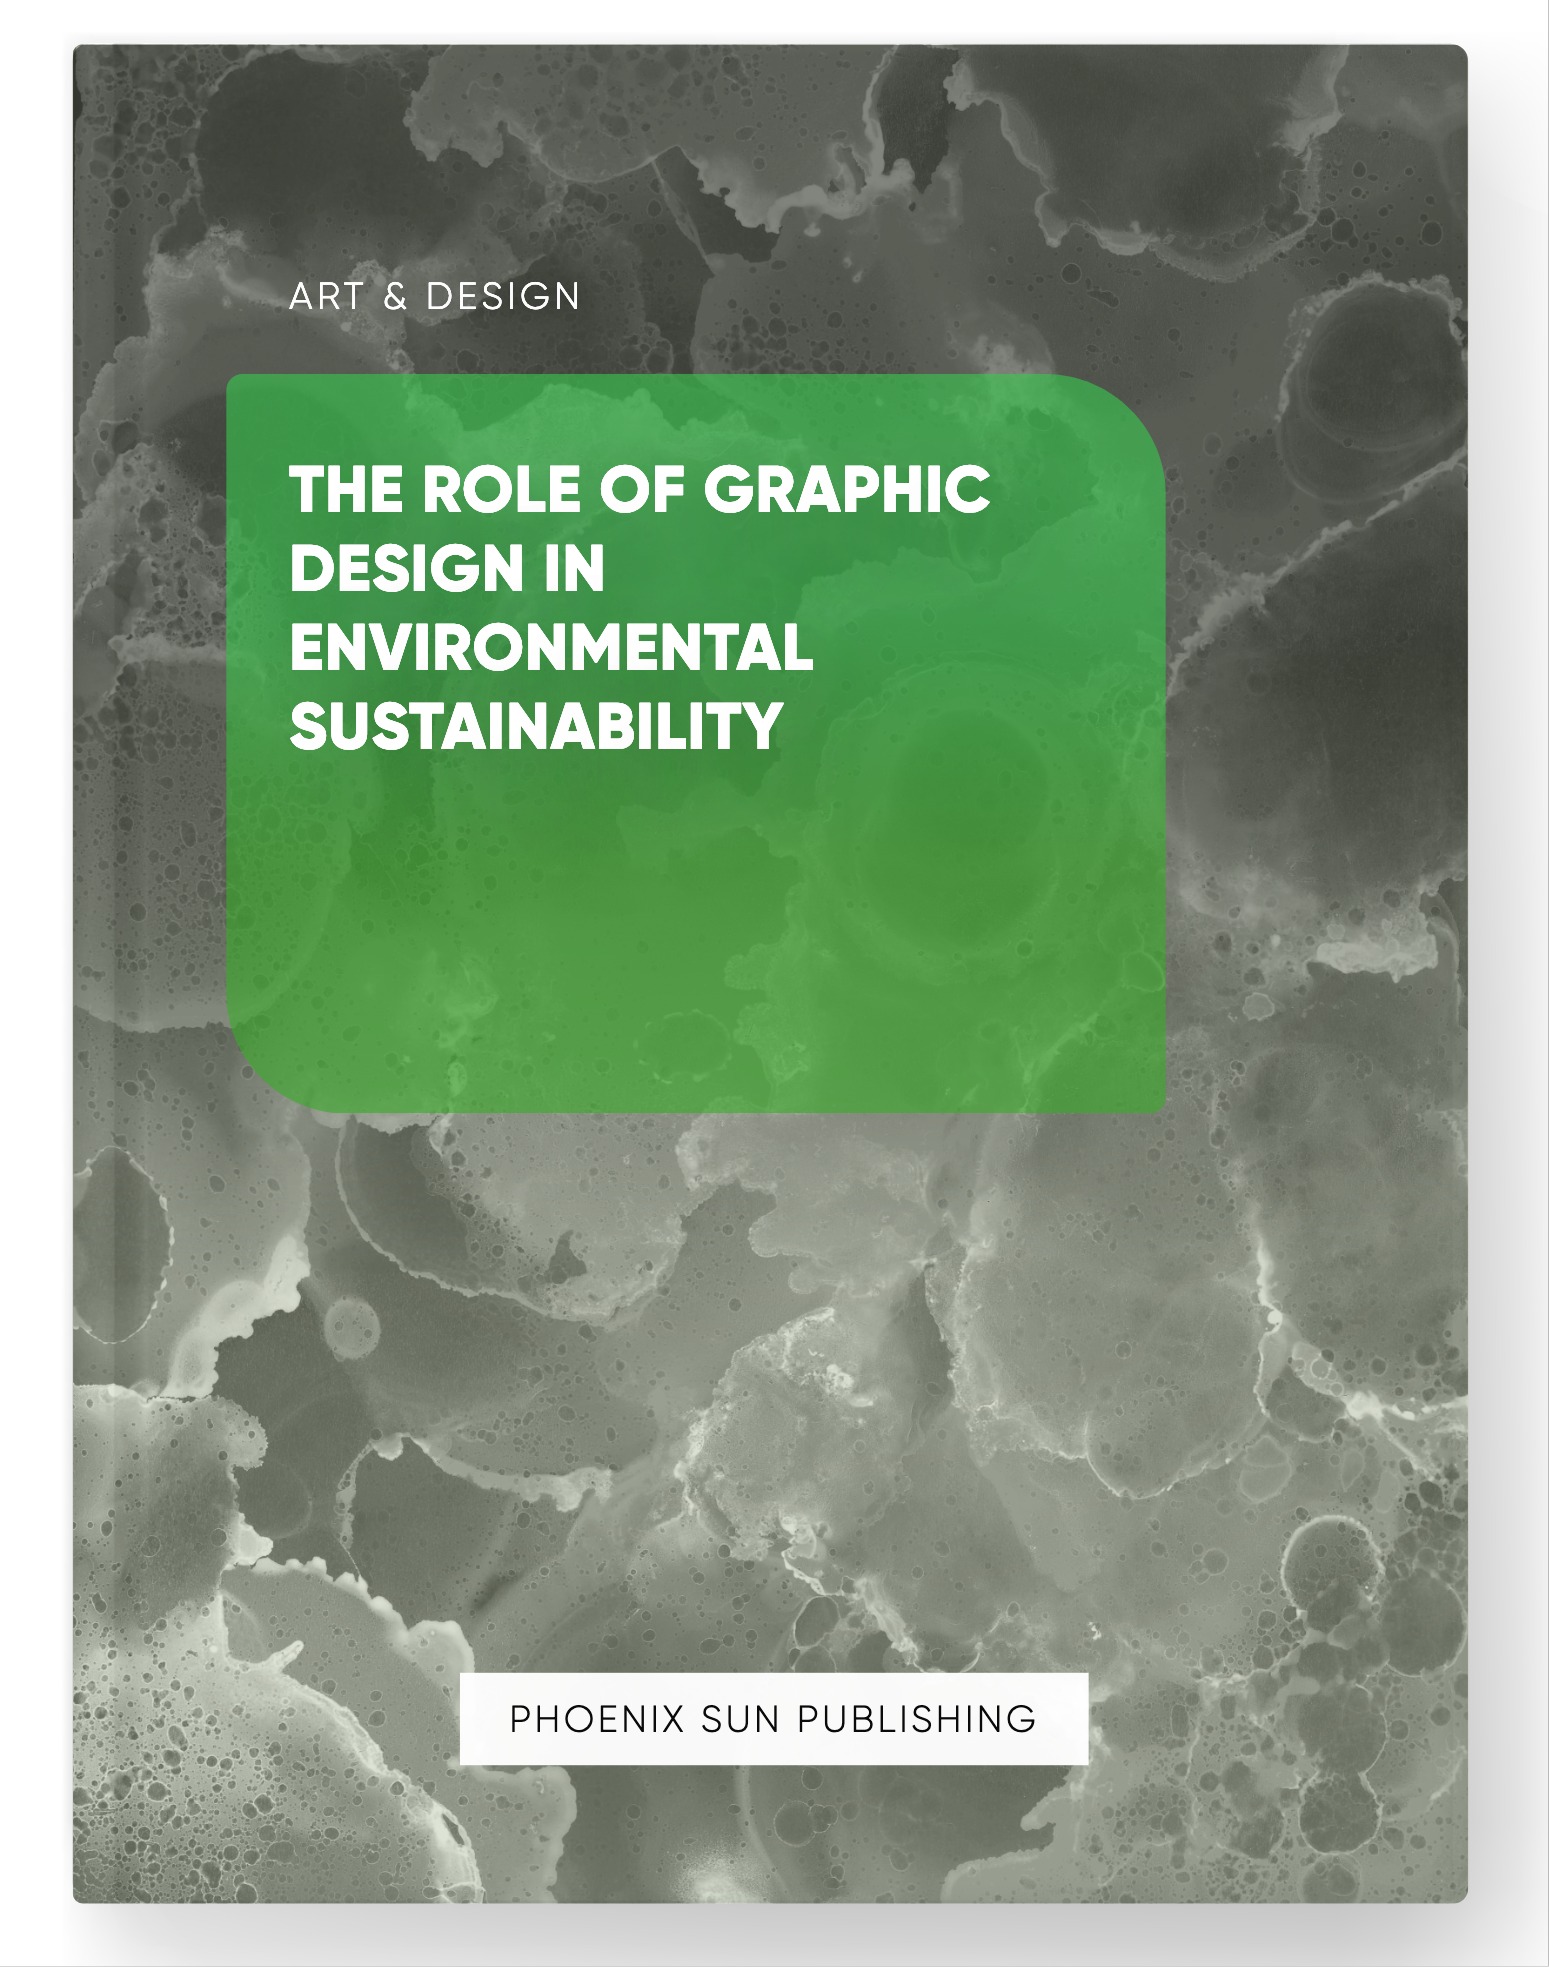 The Role of Graphic Design in Environmental Sustainability